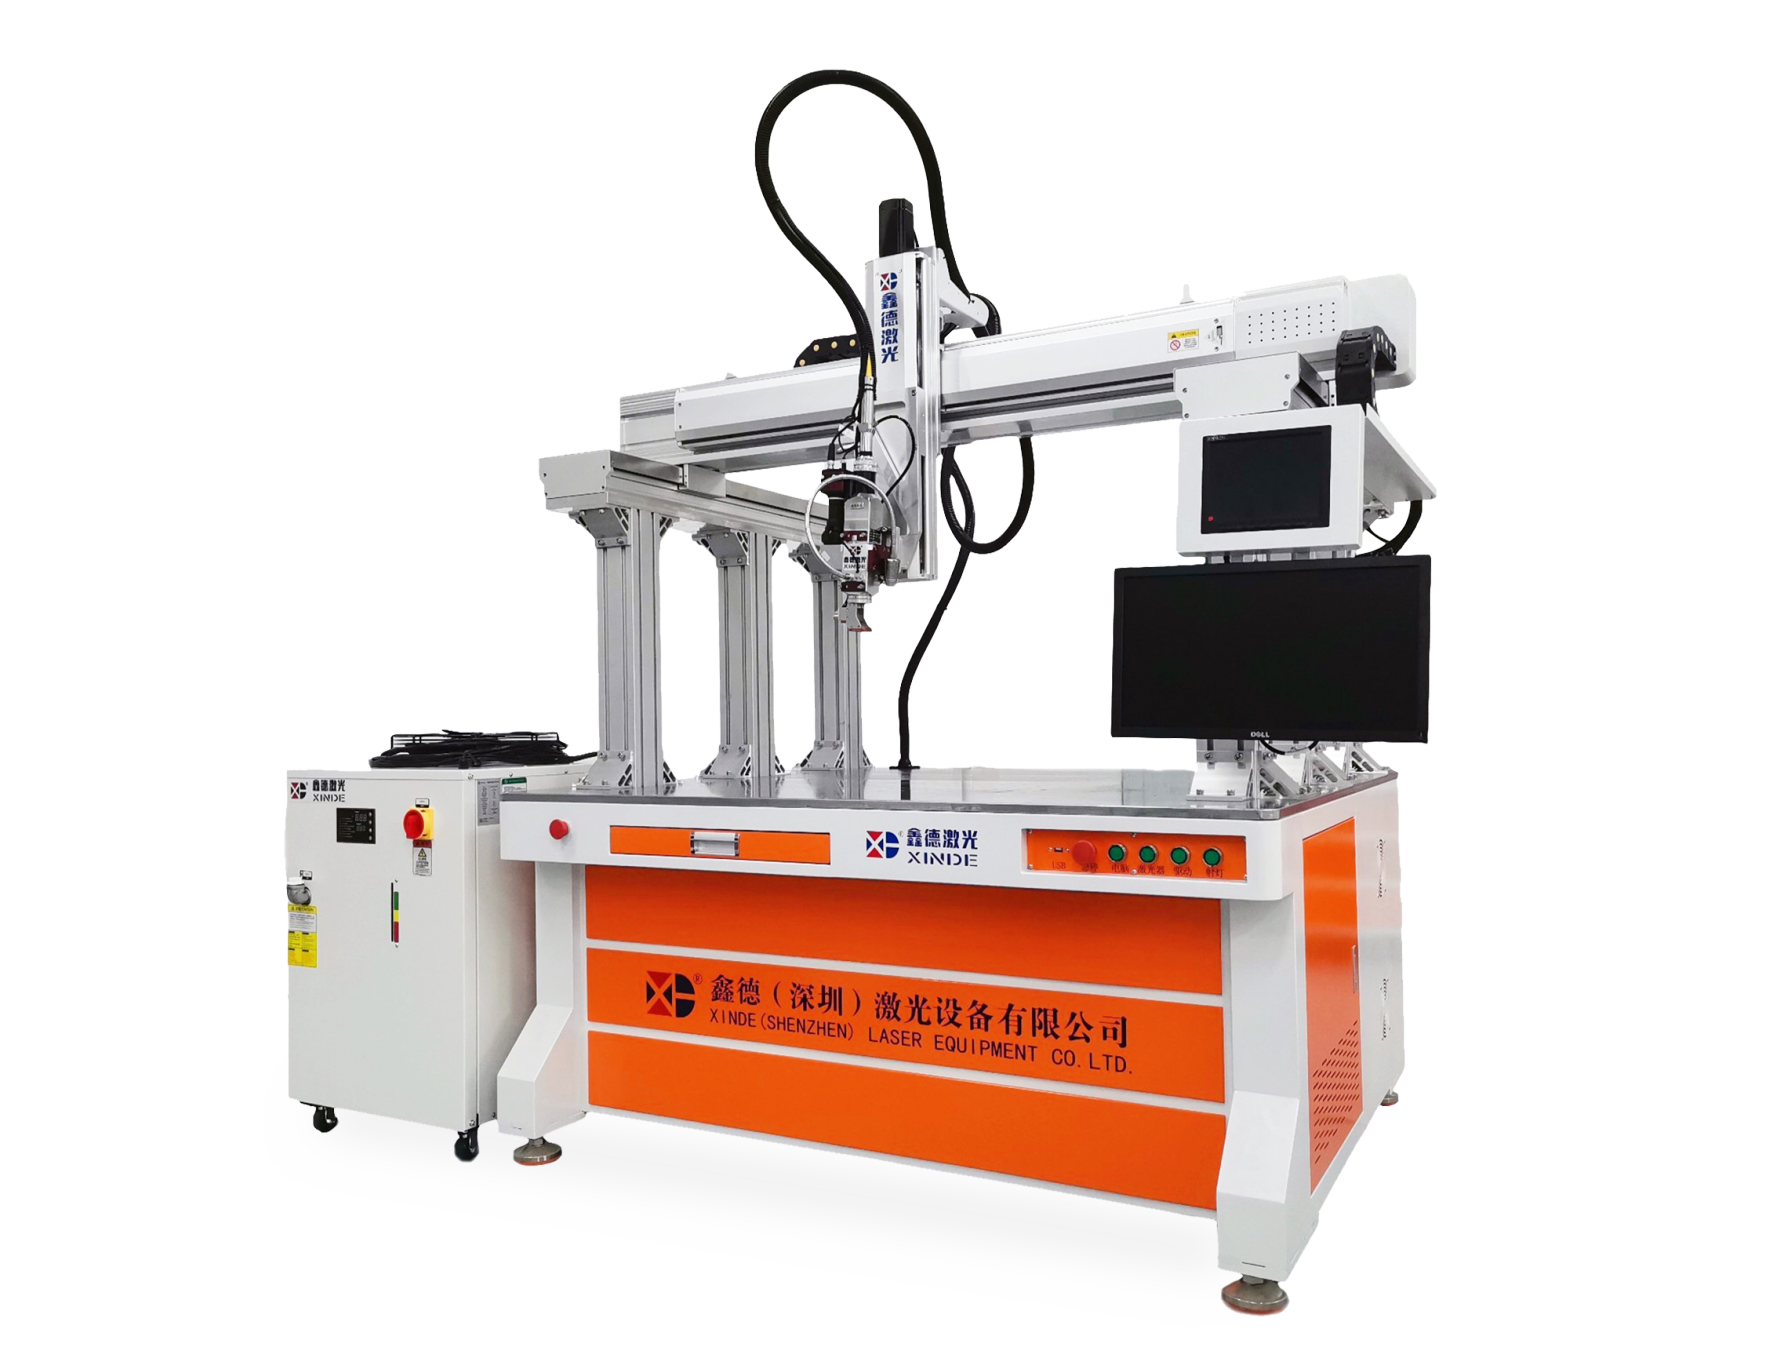 Where is the difference of laser welding machine?